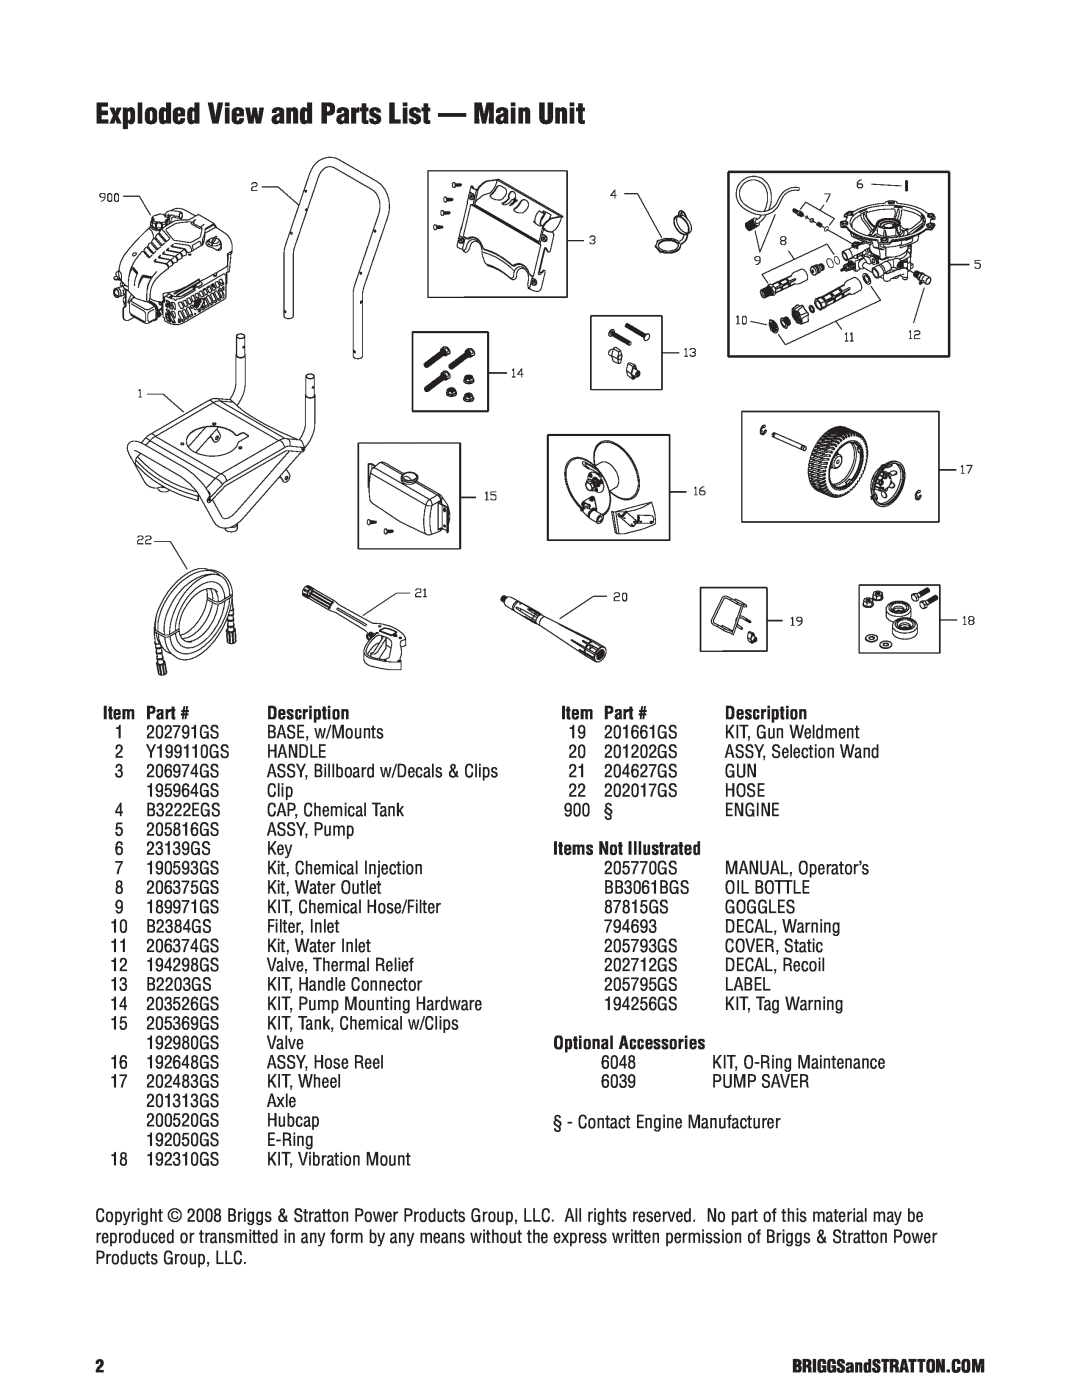 Briggs & Stratton 20363 manual Exploded View and Parts List - Main Unit, Description 